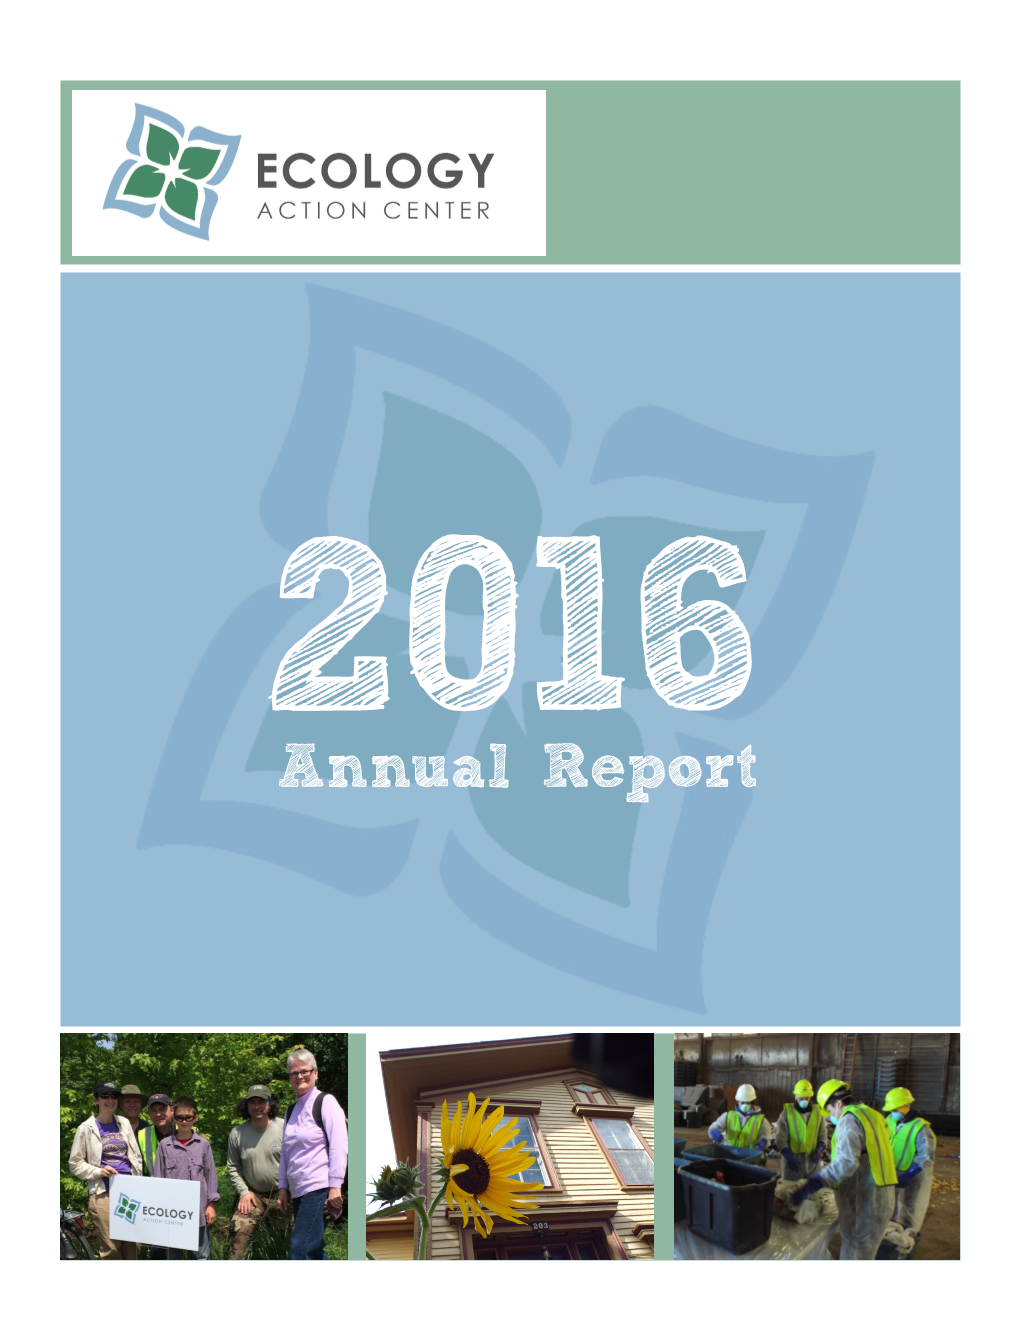 Annual Report 2016: a Turning Point